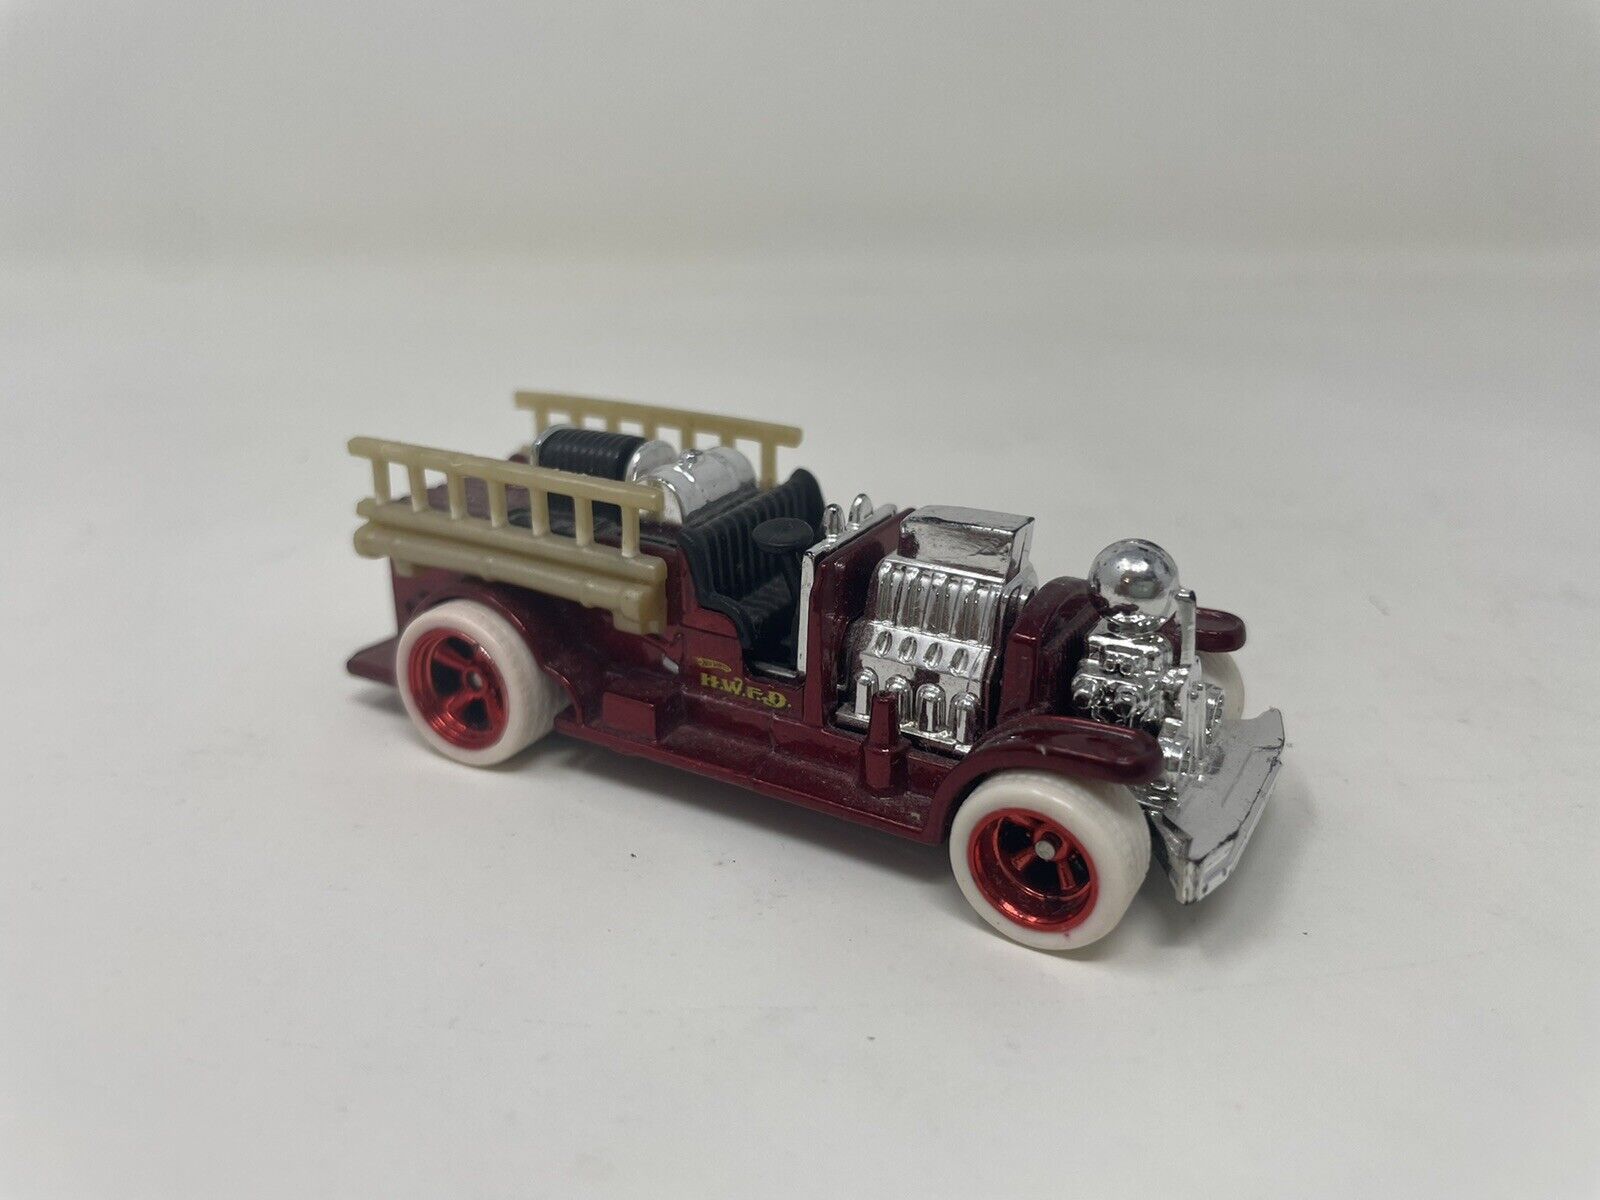 Hot Wheels Super Treasure Hunt Version of a '69 Ford Can Cost $180